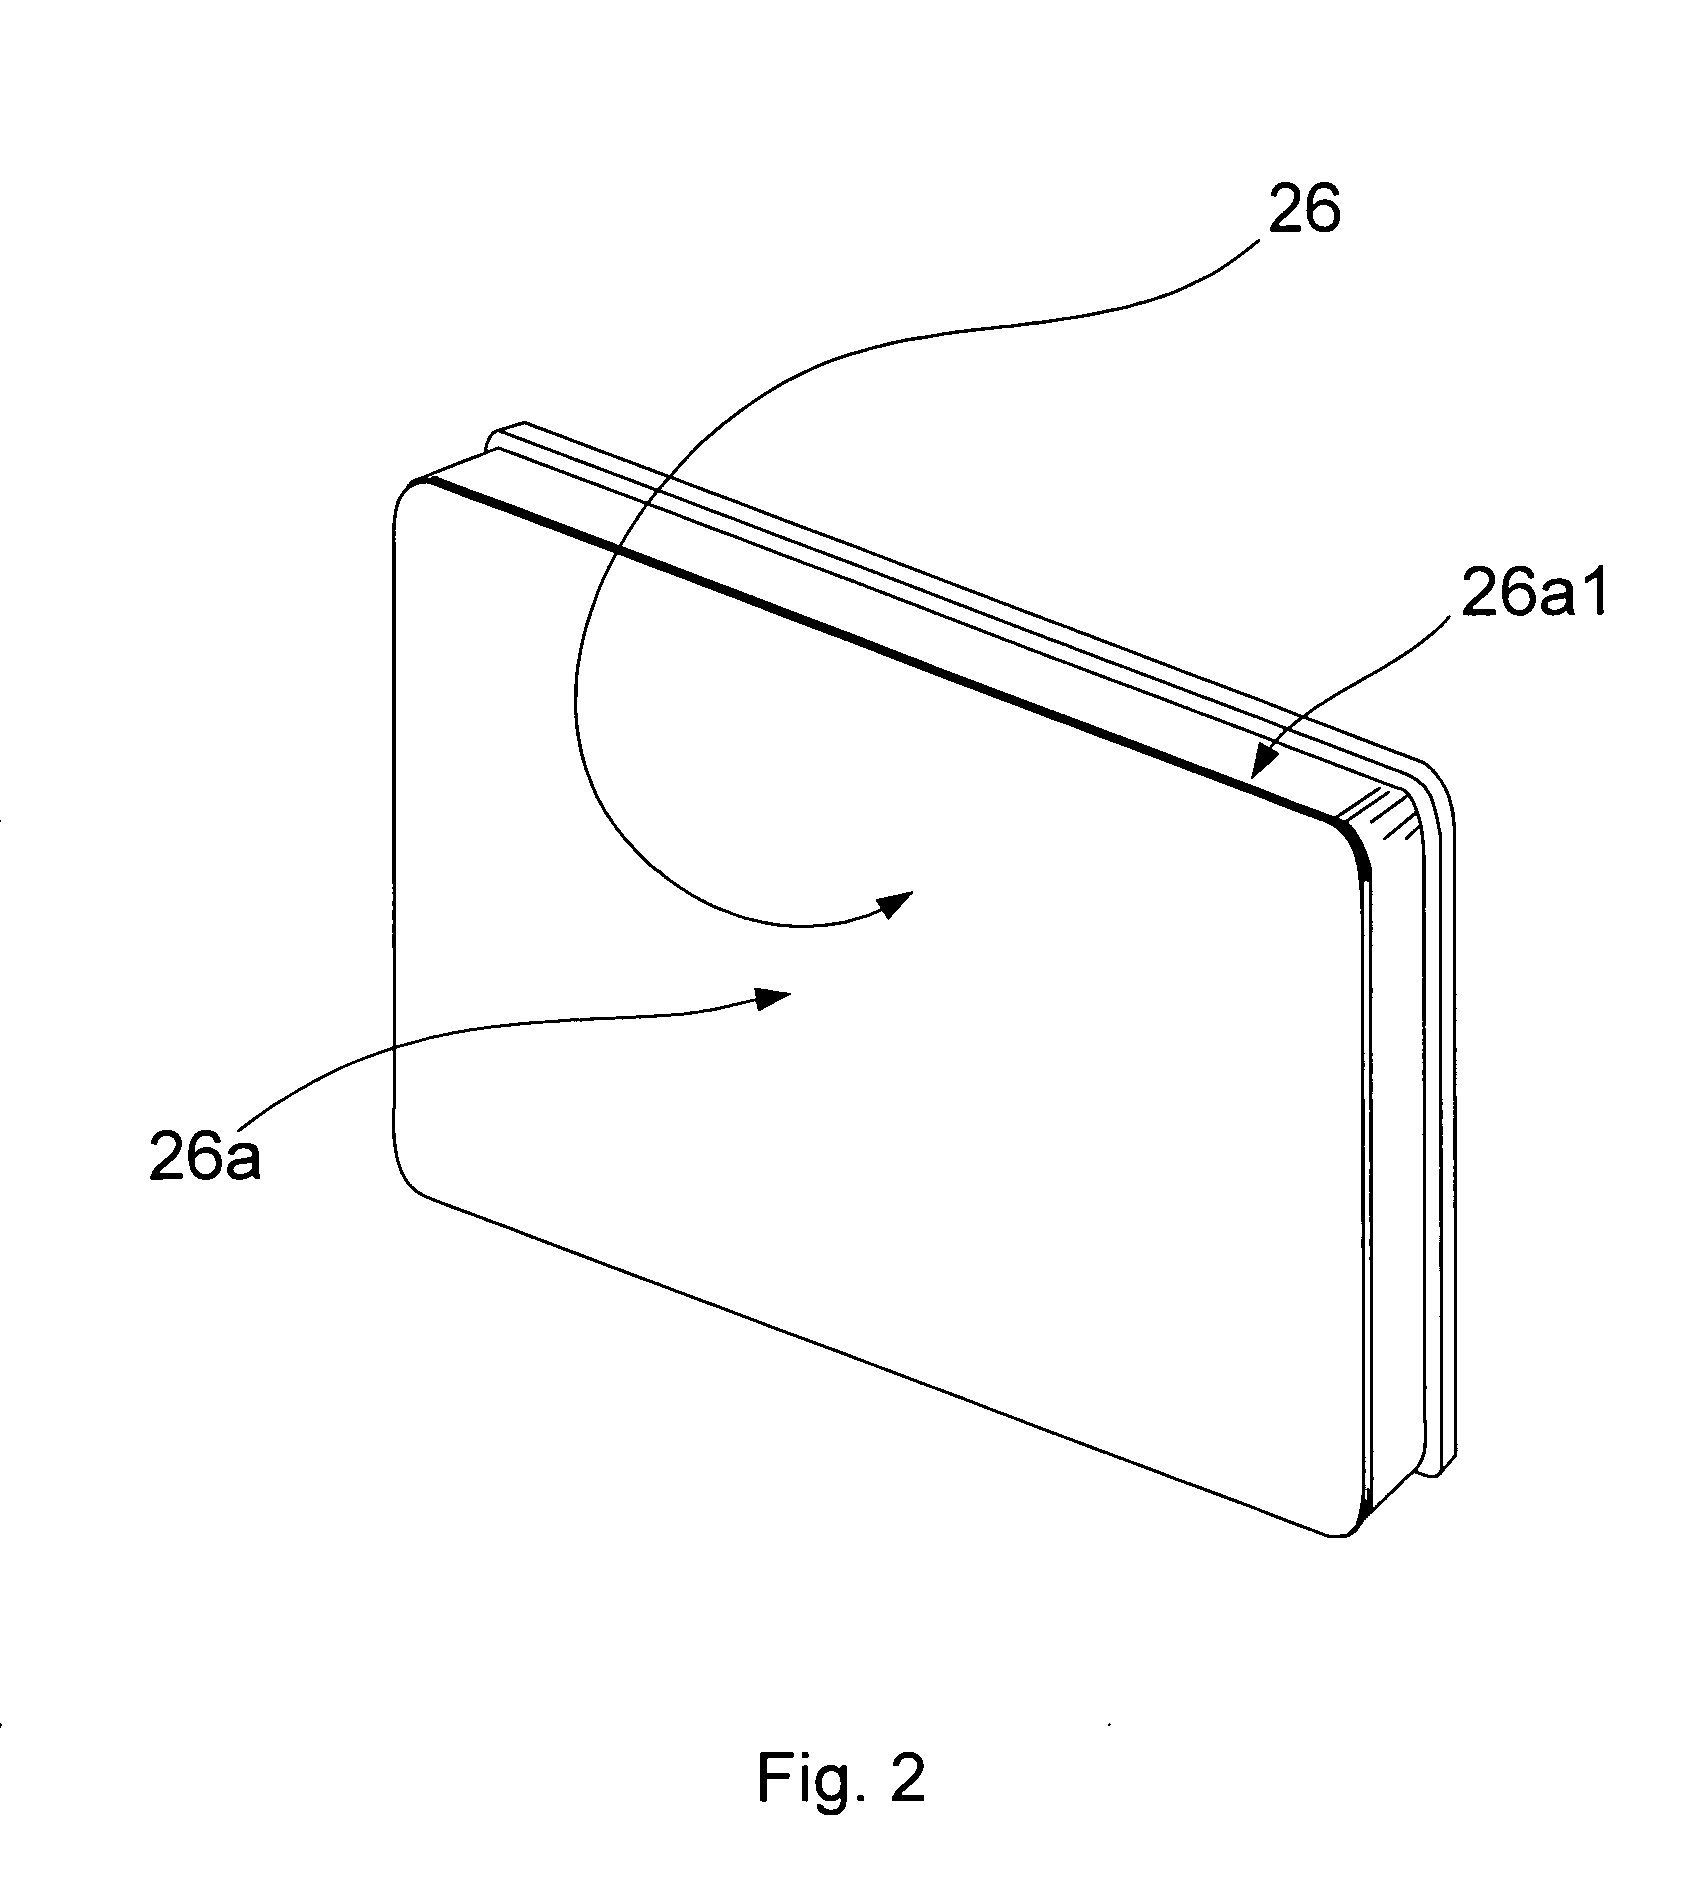 Apparatus and method for application of a thin barrier layer onto inner surfaces of wafer containers